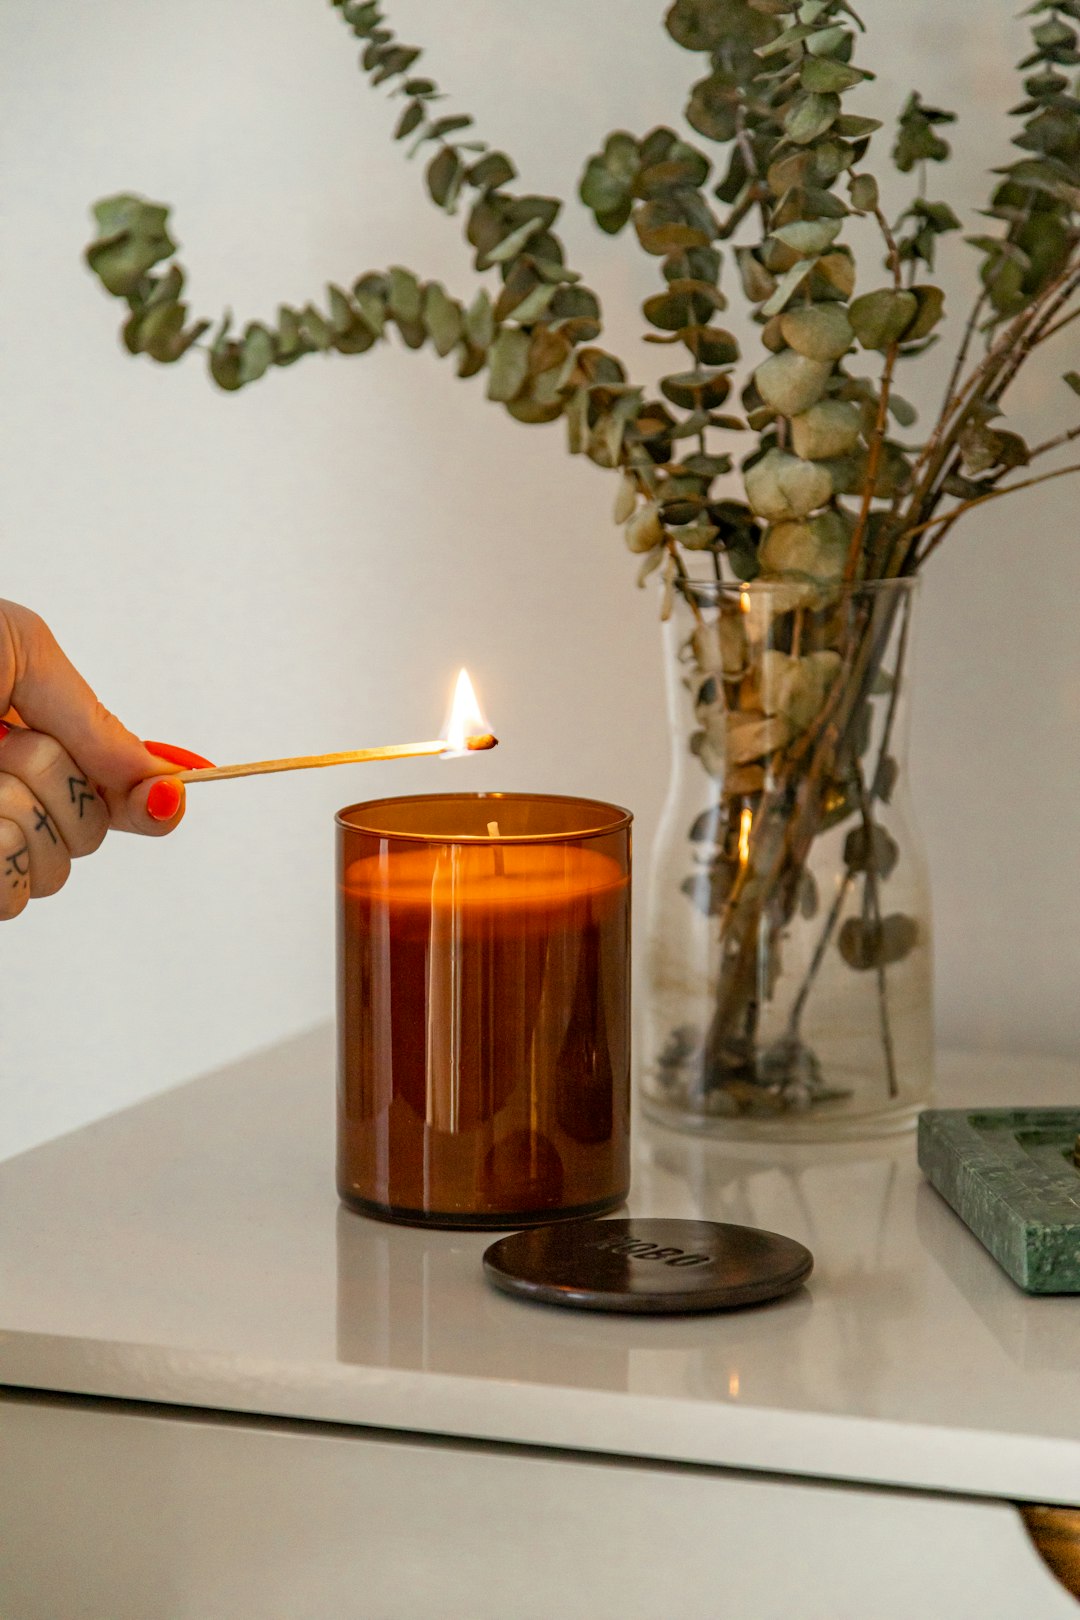  person holding lighted candle near green plant candle